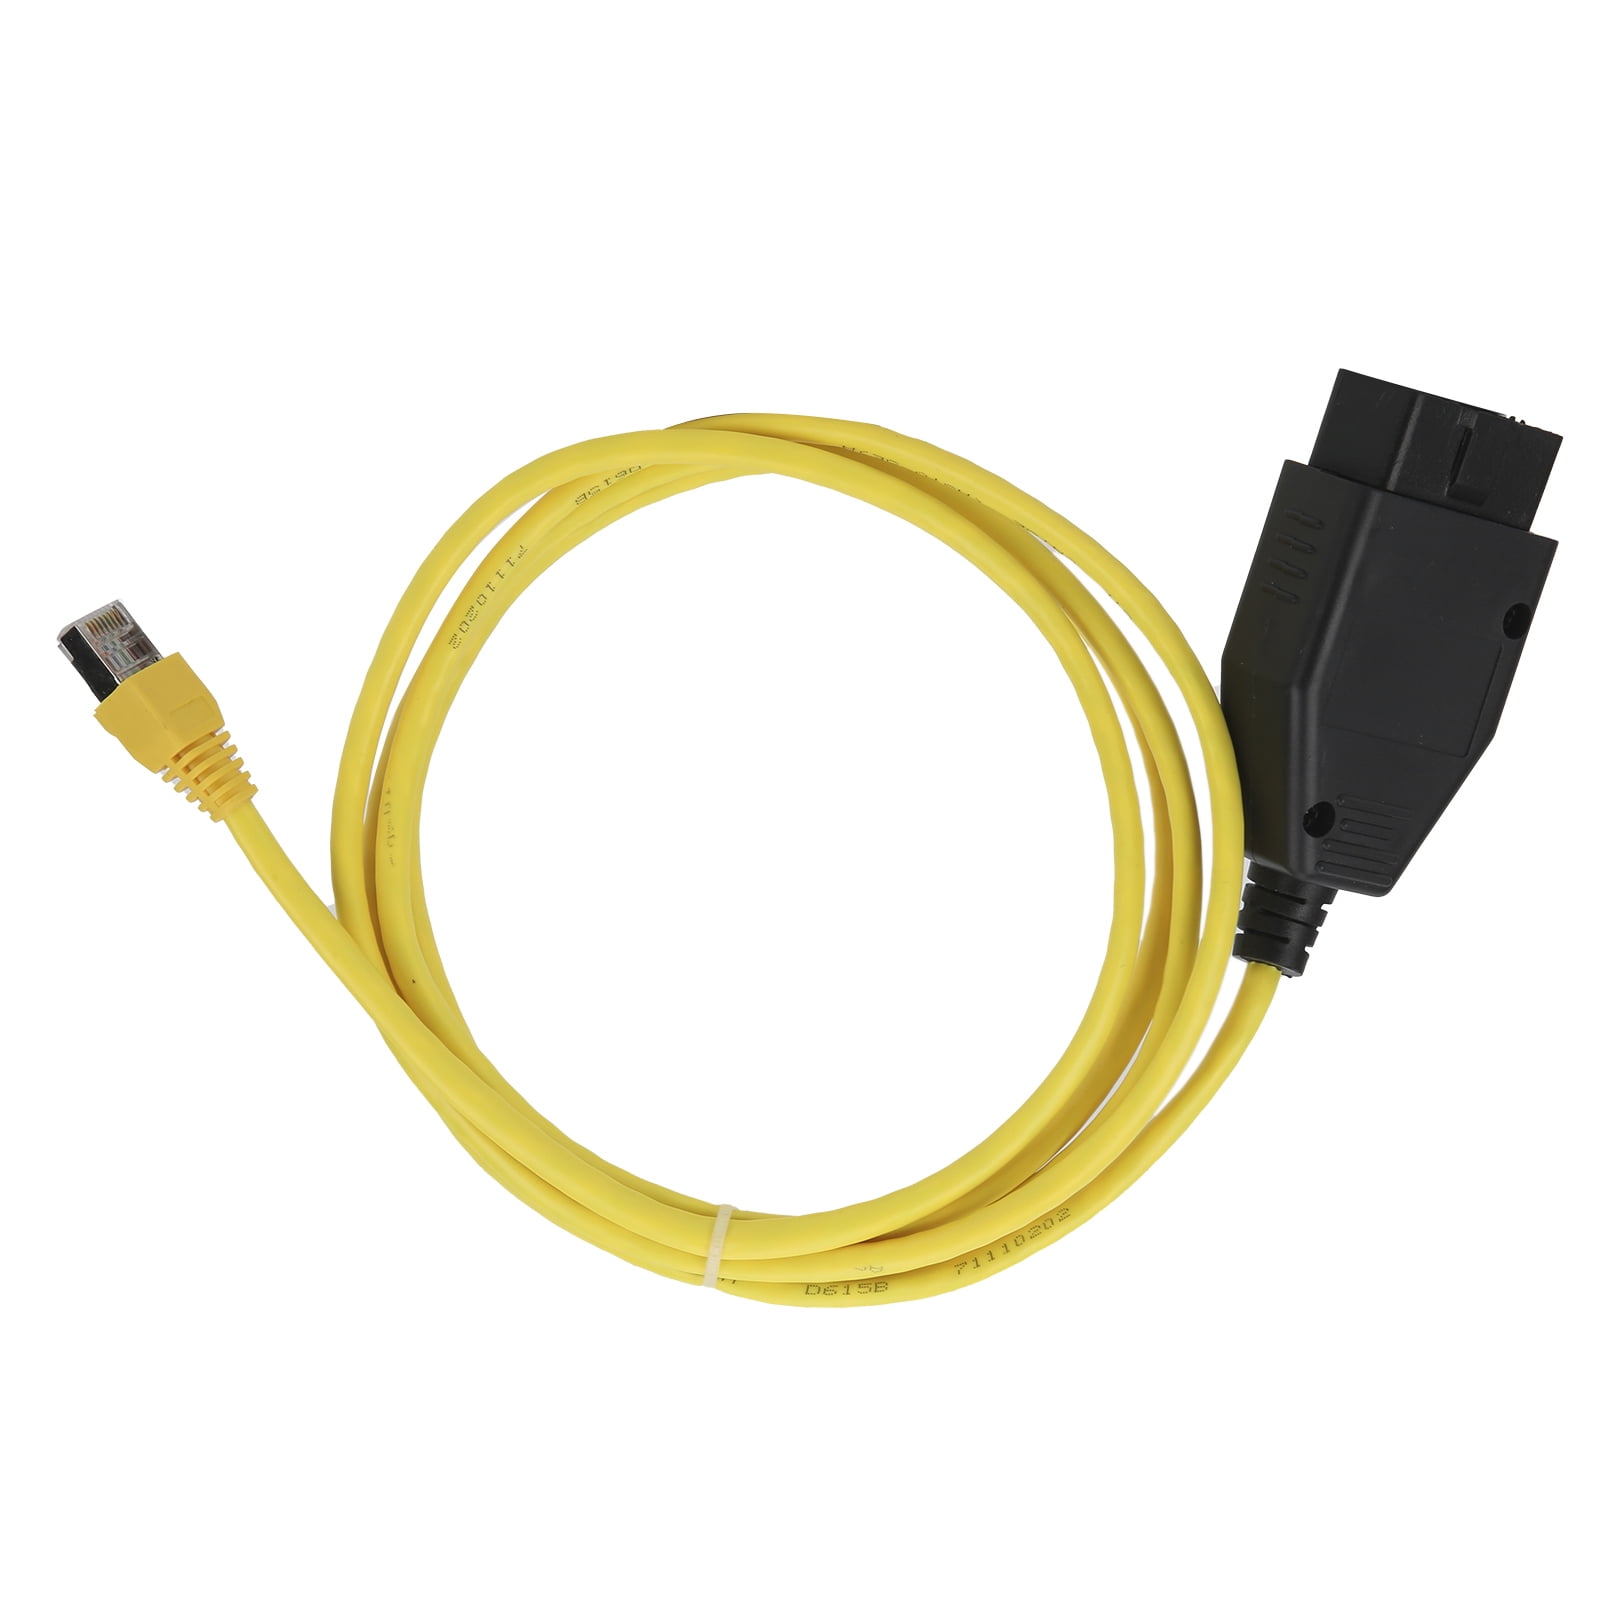 ENET Coding OBD2 Cable